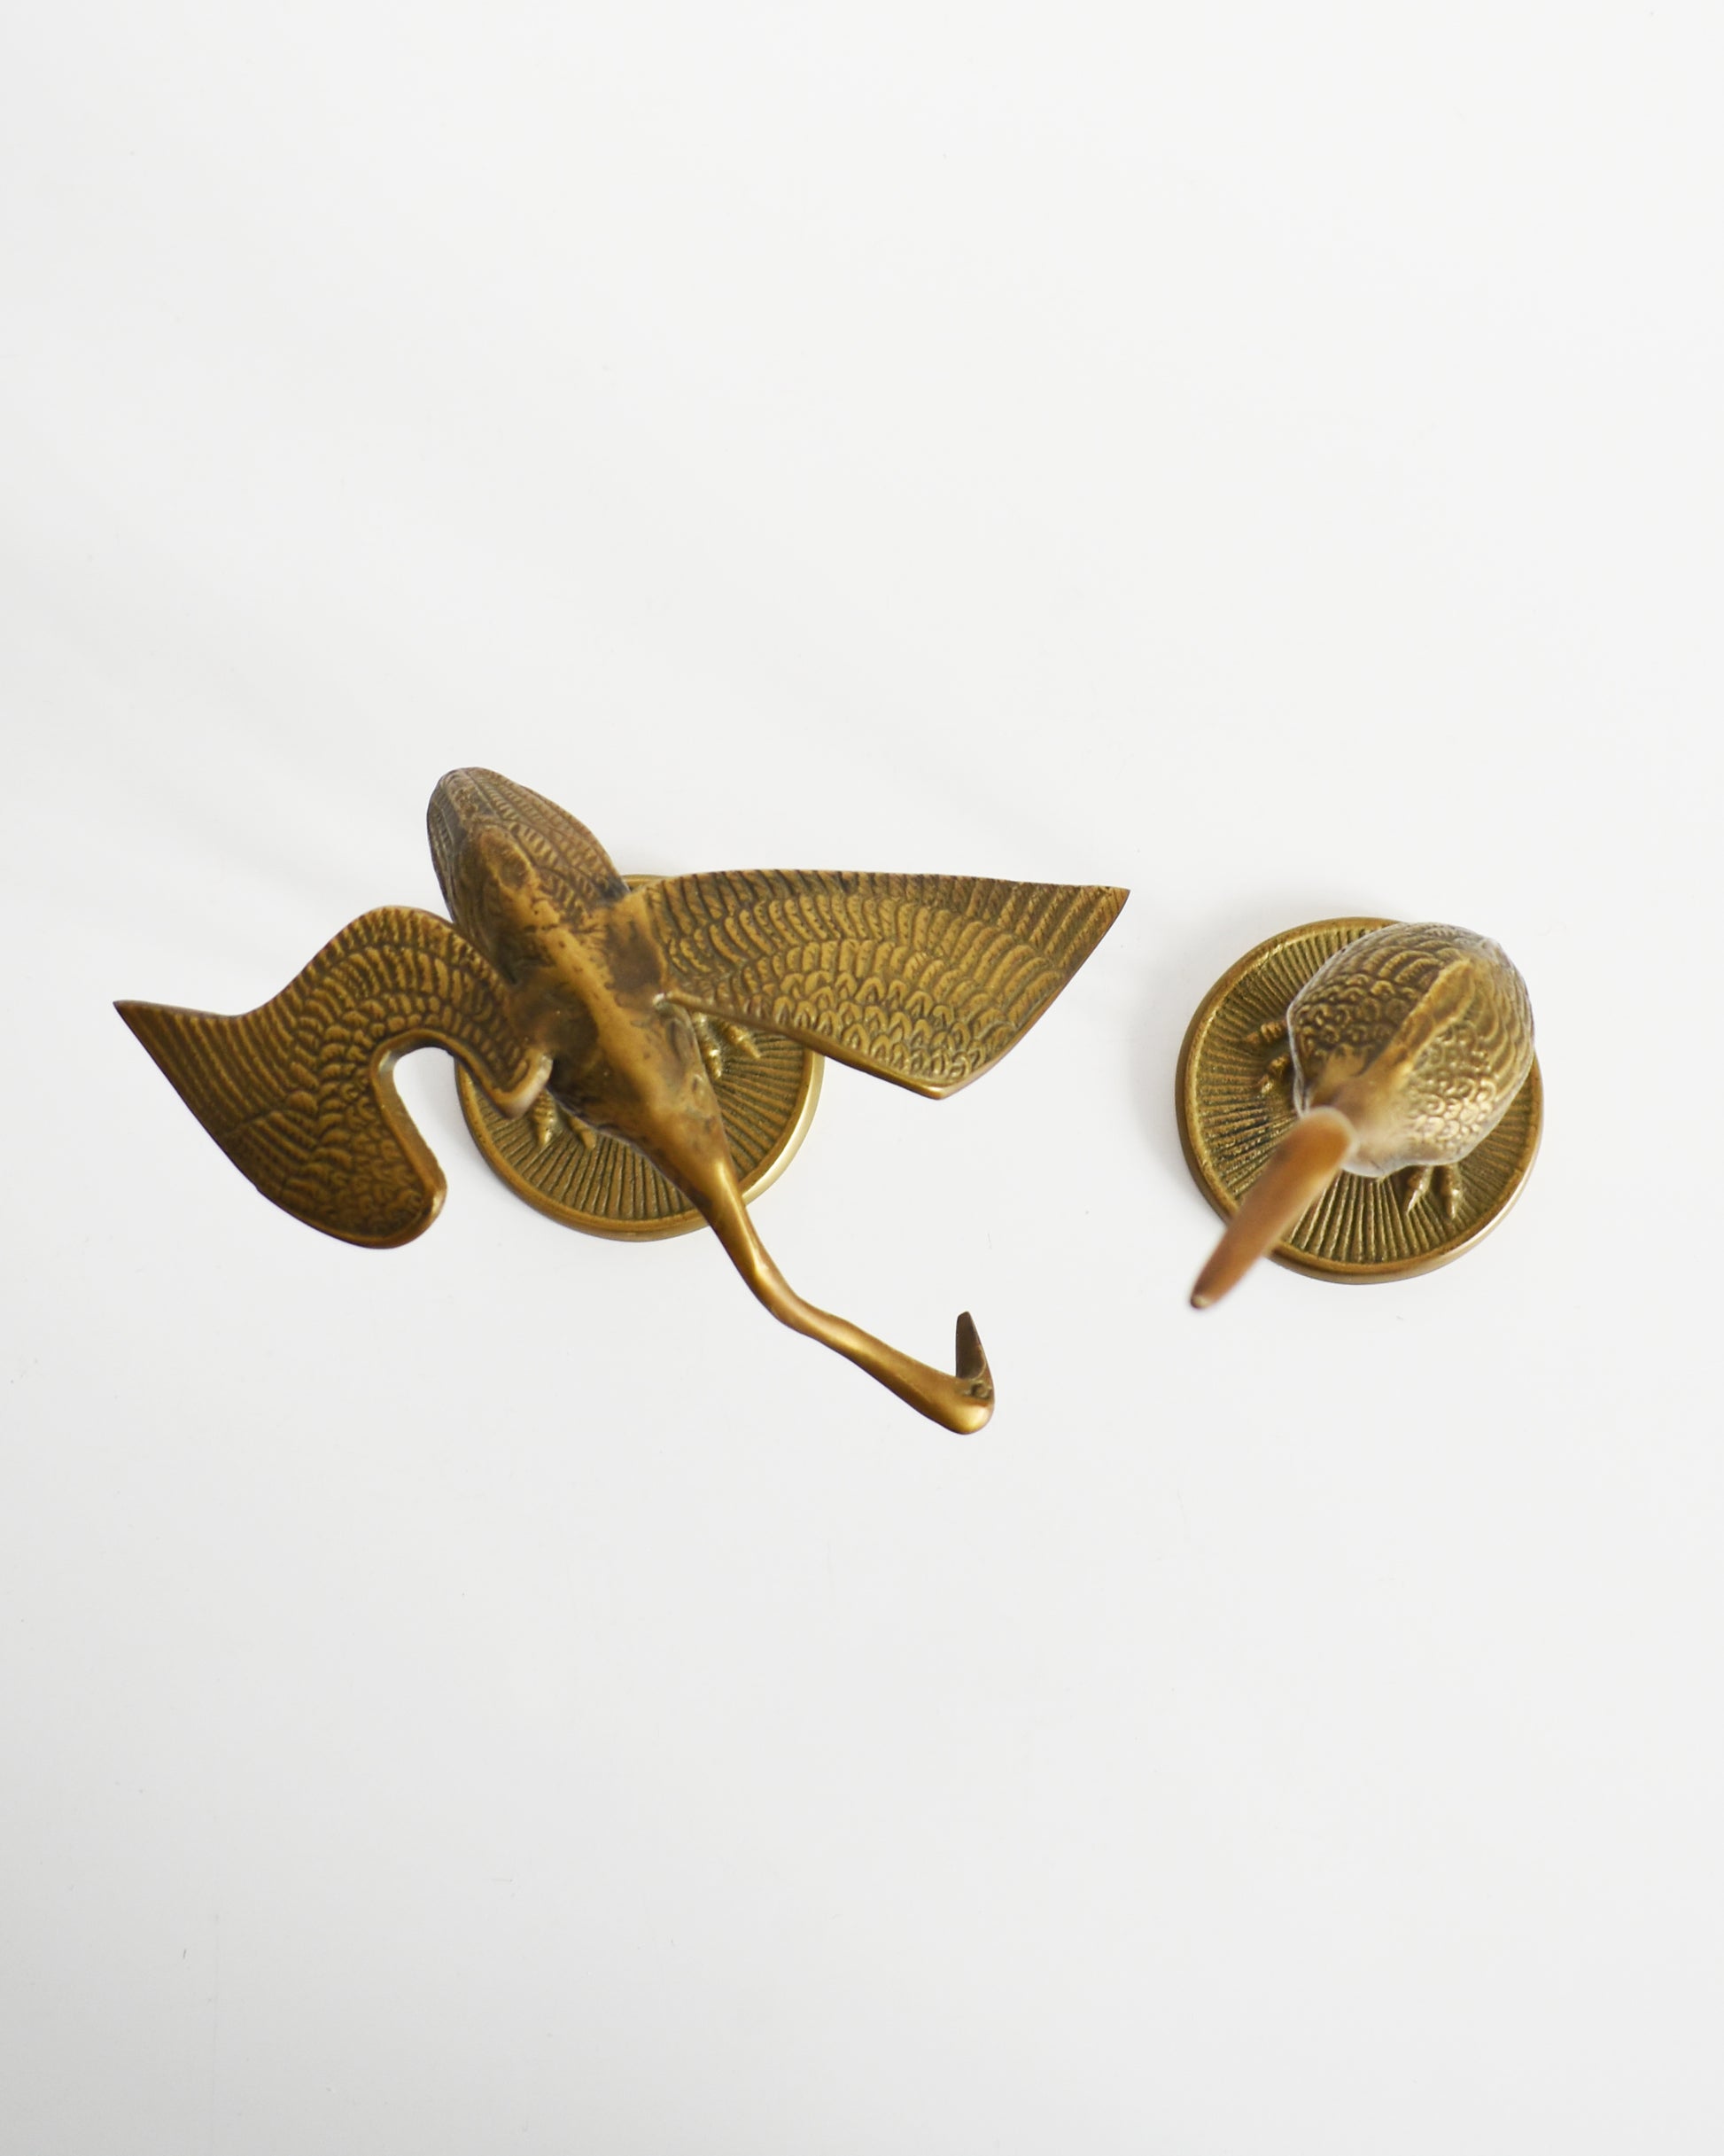 Overhead view of a pair of vintage brass cranes that have ornate carved detail on their wings and body.